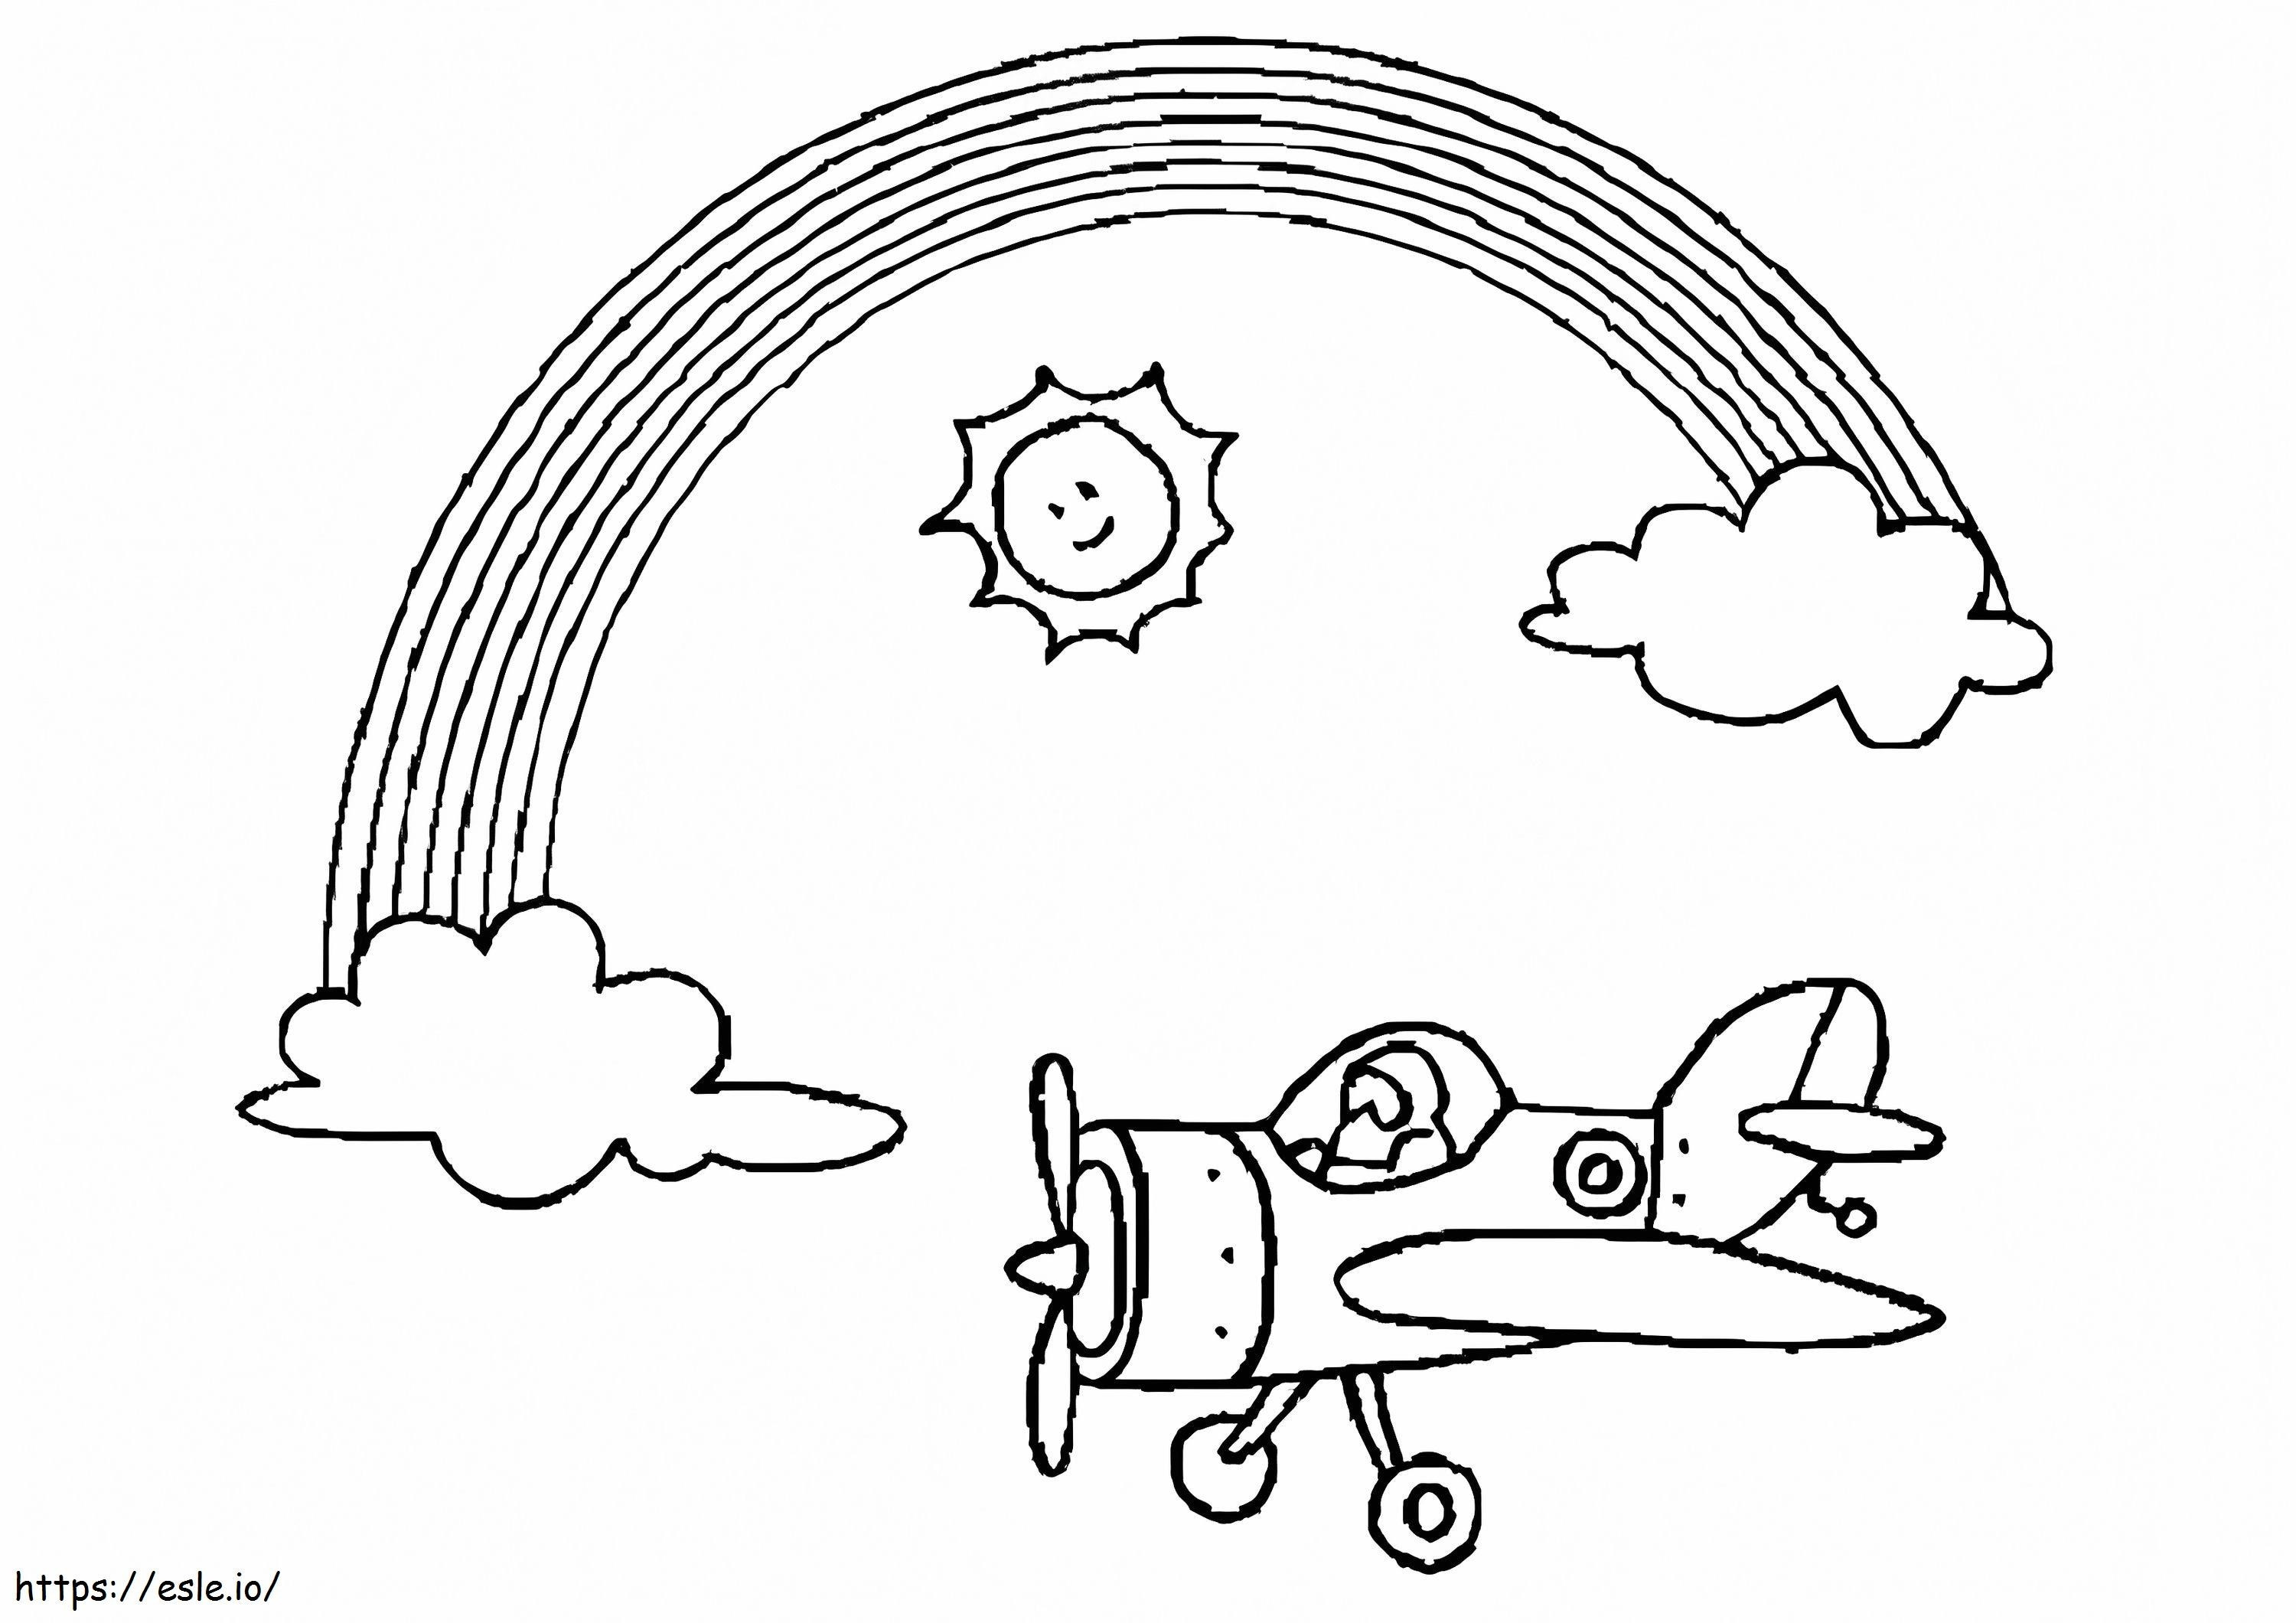 Plane And Rainbow coloring page